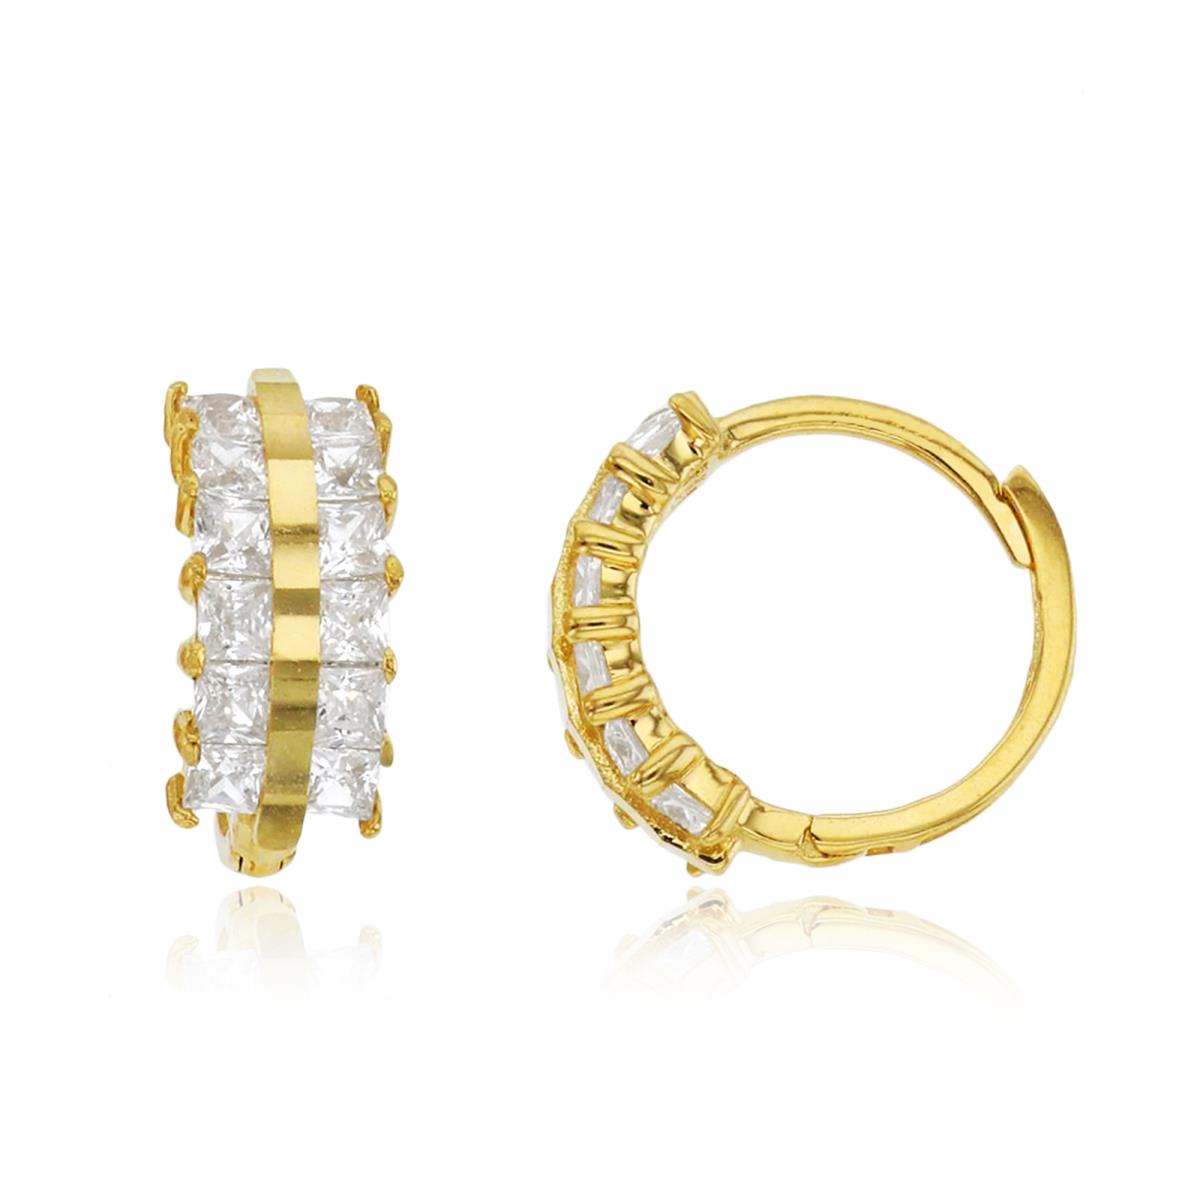 10K Yellow Gold DC Middle & Princess CZ on Sides Huggie Earrings